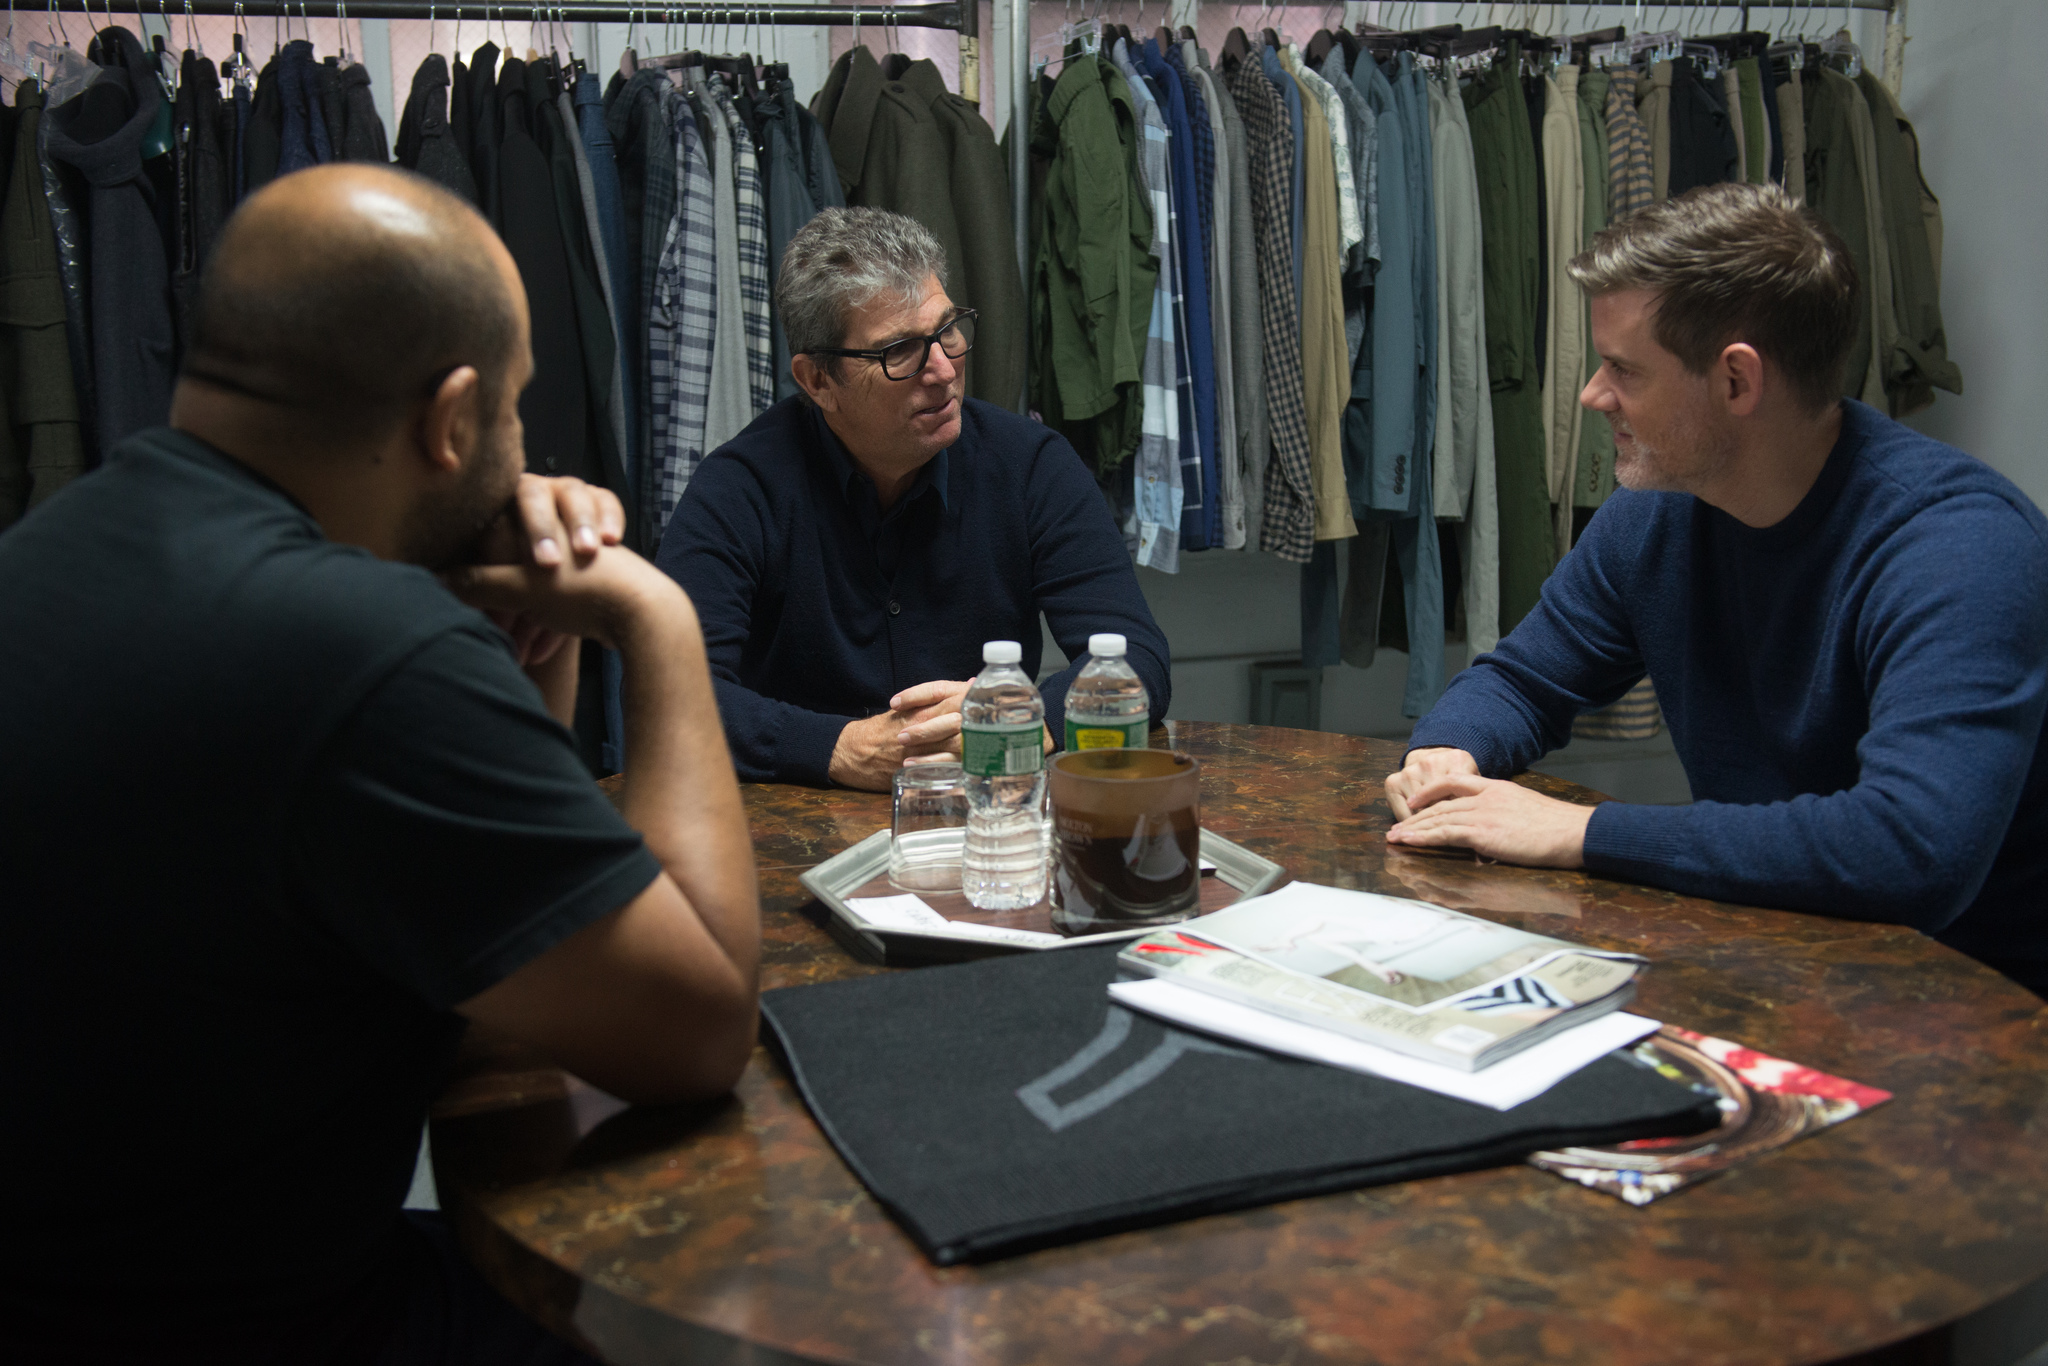 Still of Andrew Rosen, Brad Schmidt and Raul Arevalo in The Fashion Fund (2014)